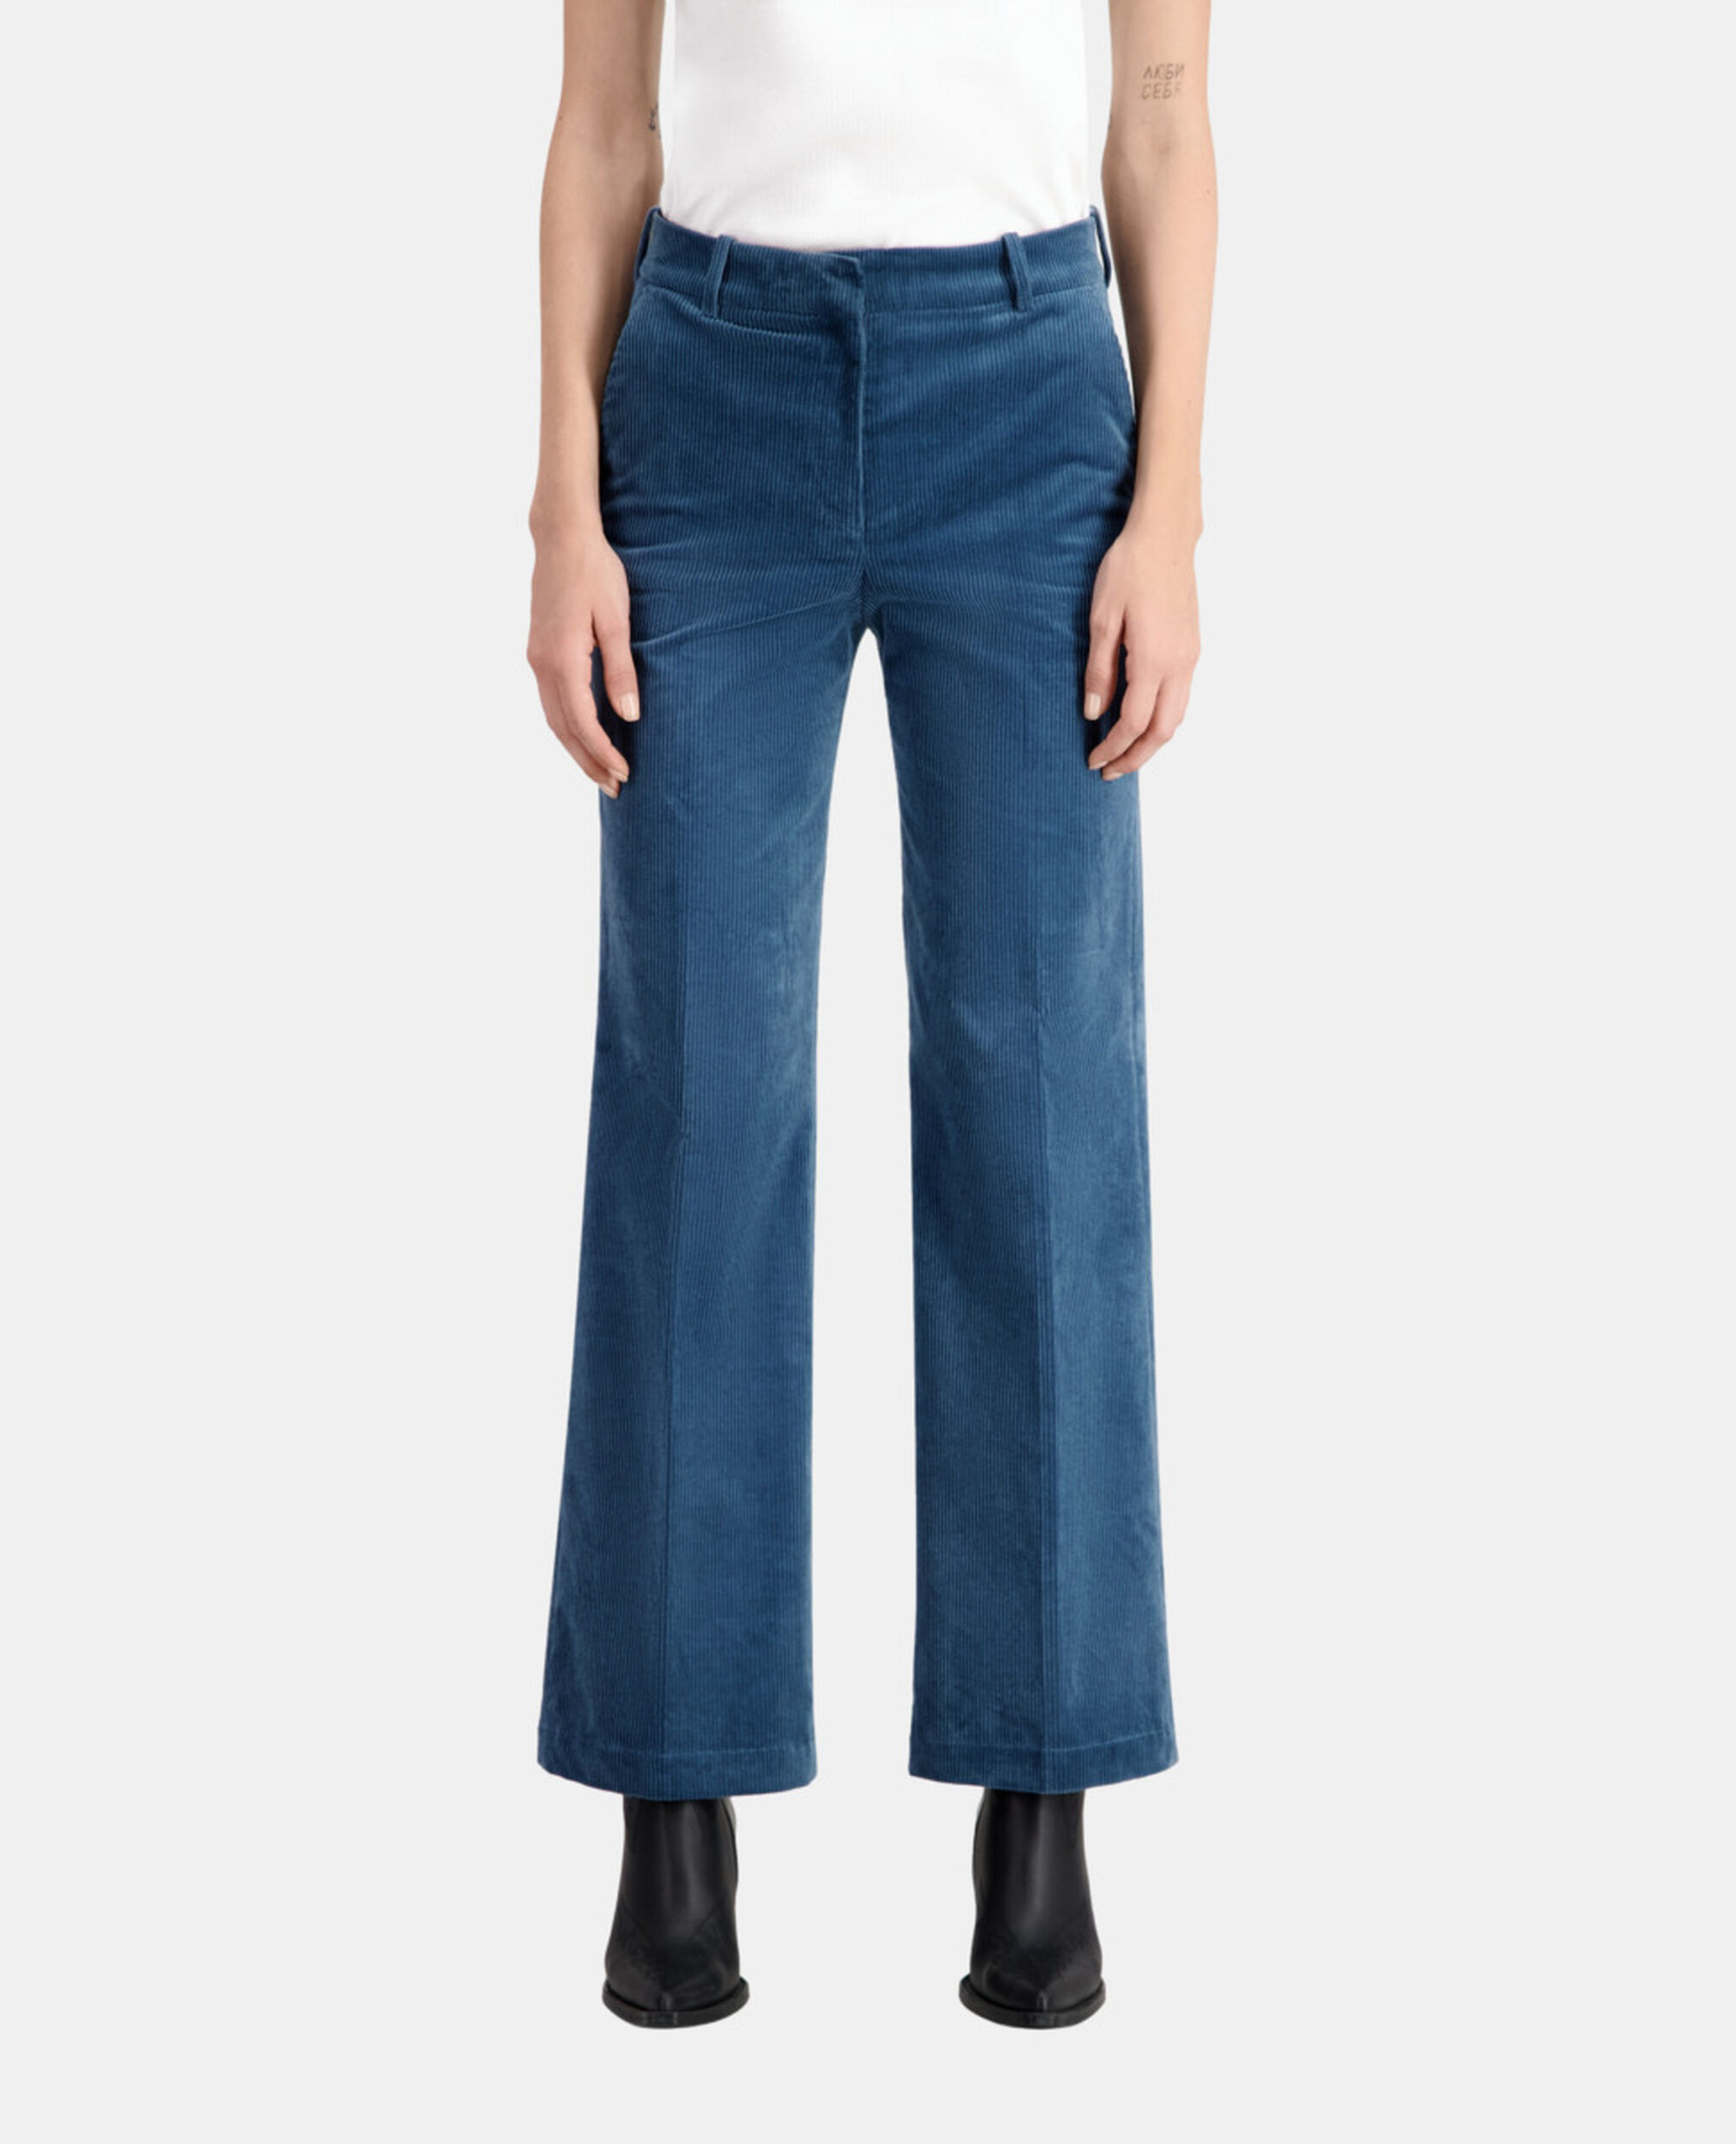 Blue corduroy trousers, BLUE PETROL, hi-res image number null